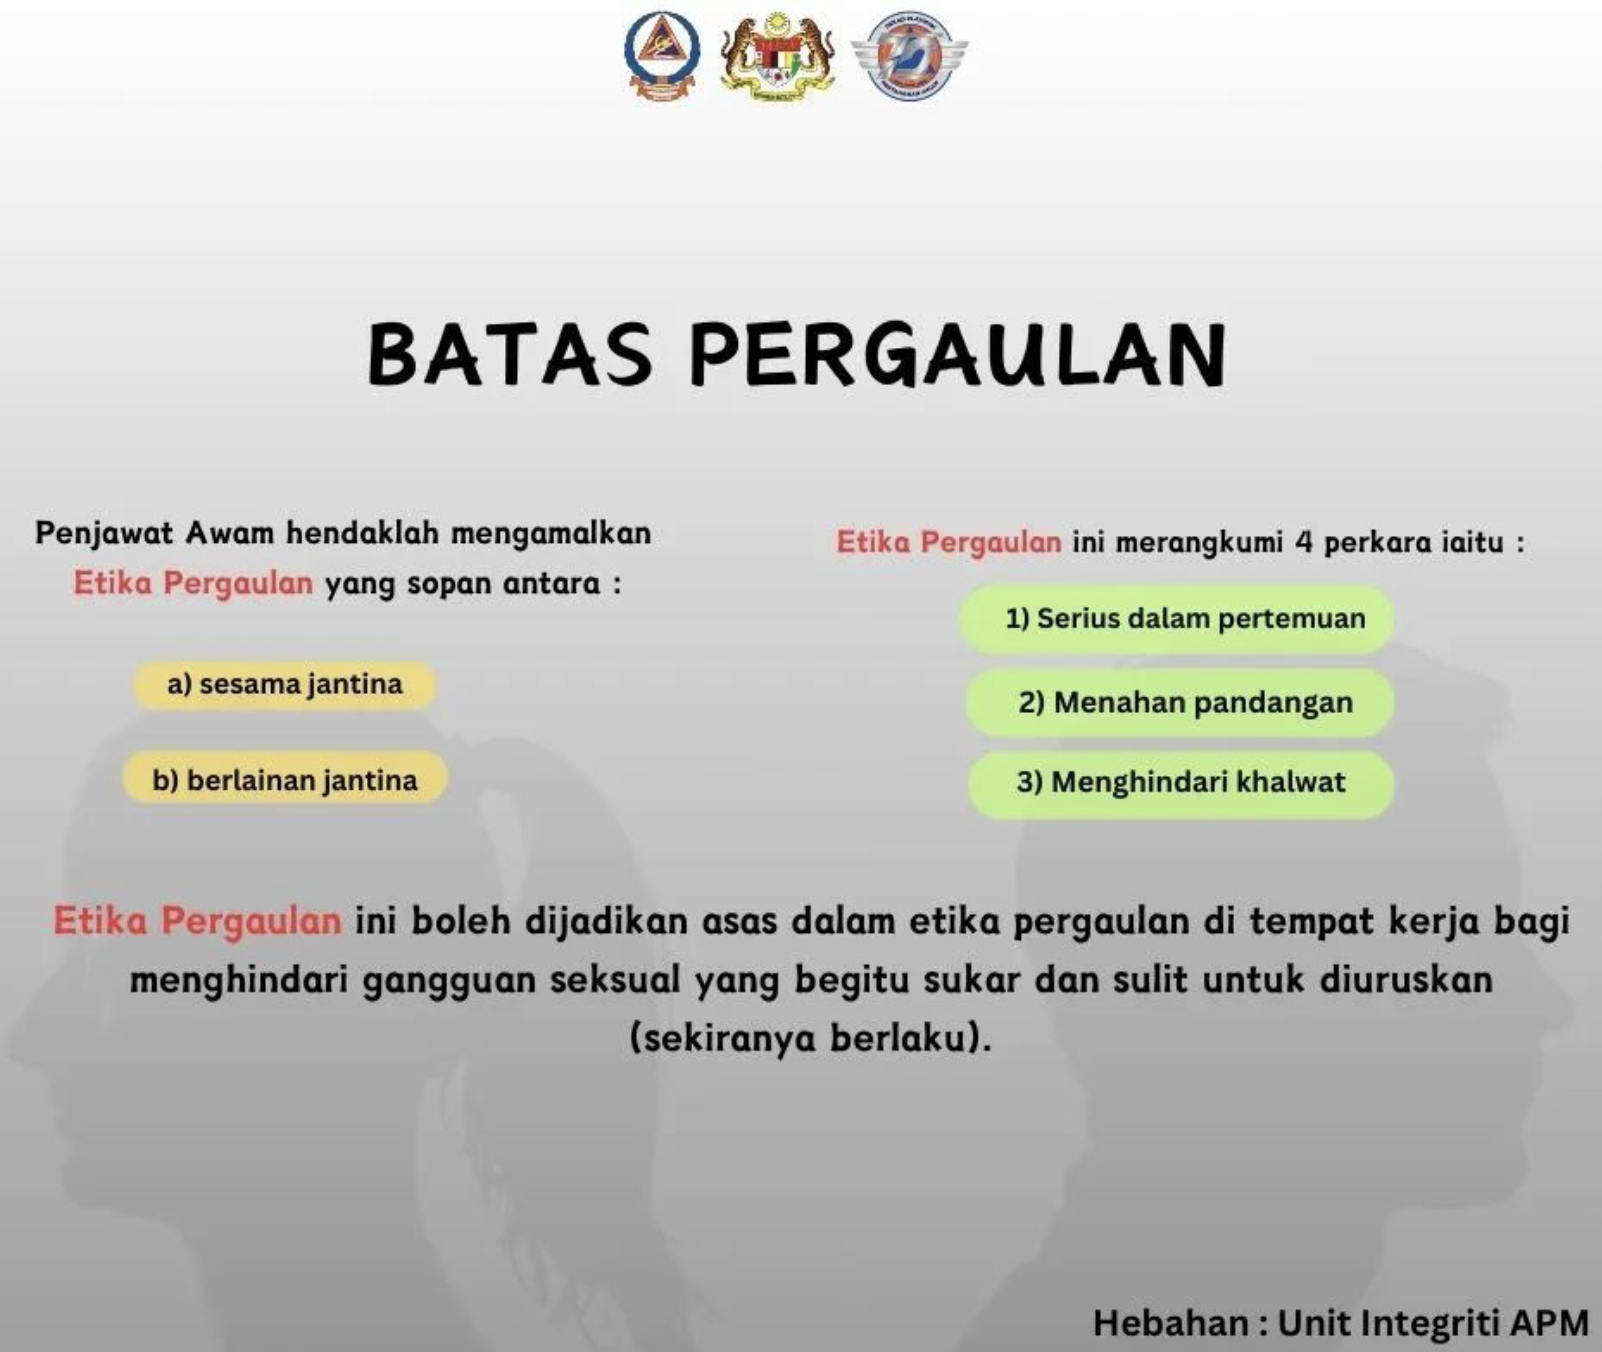 Apm poster about warning public servant on extramaritial affairs 2